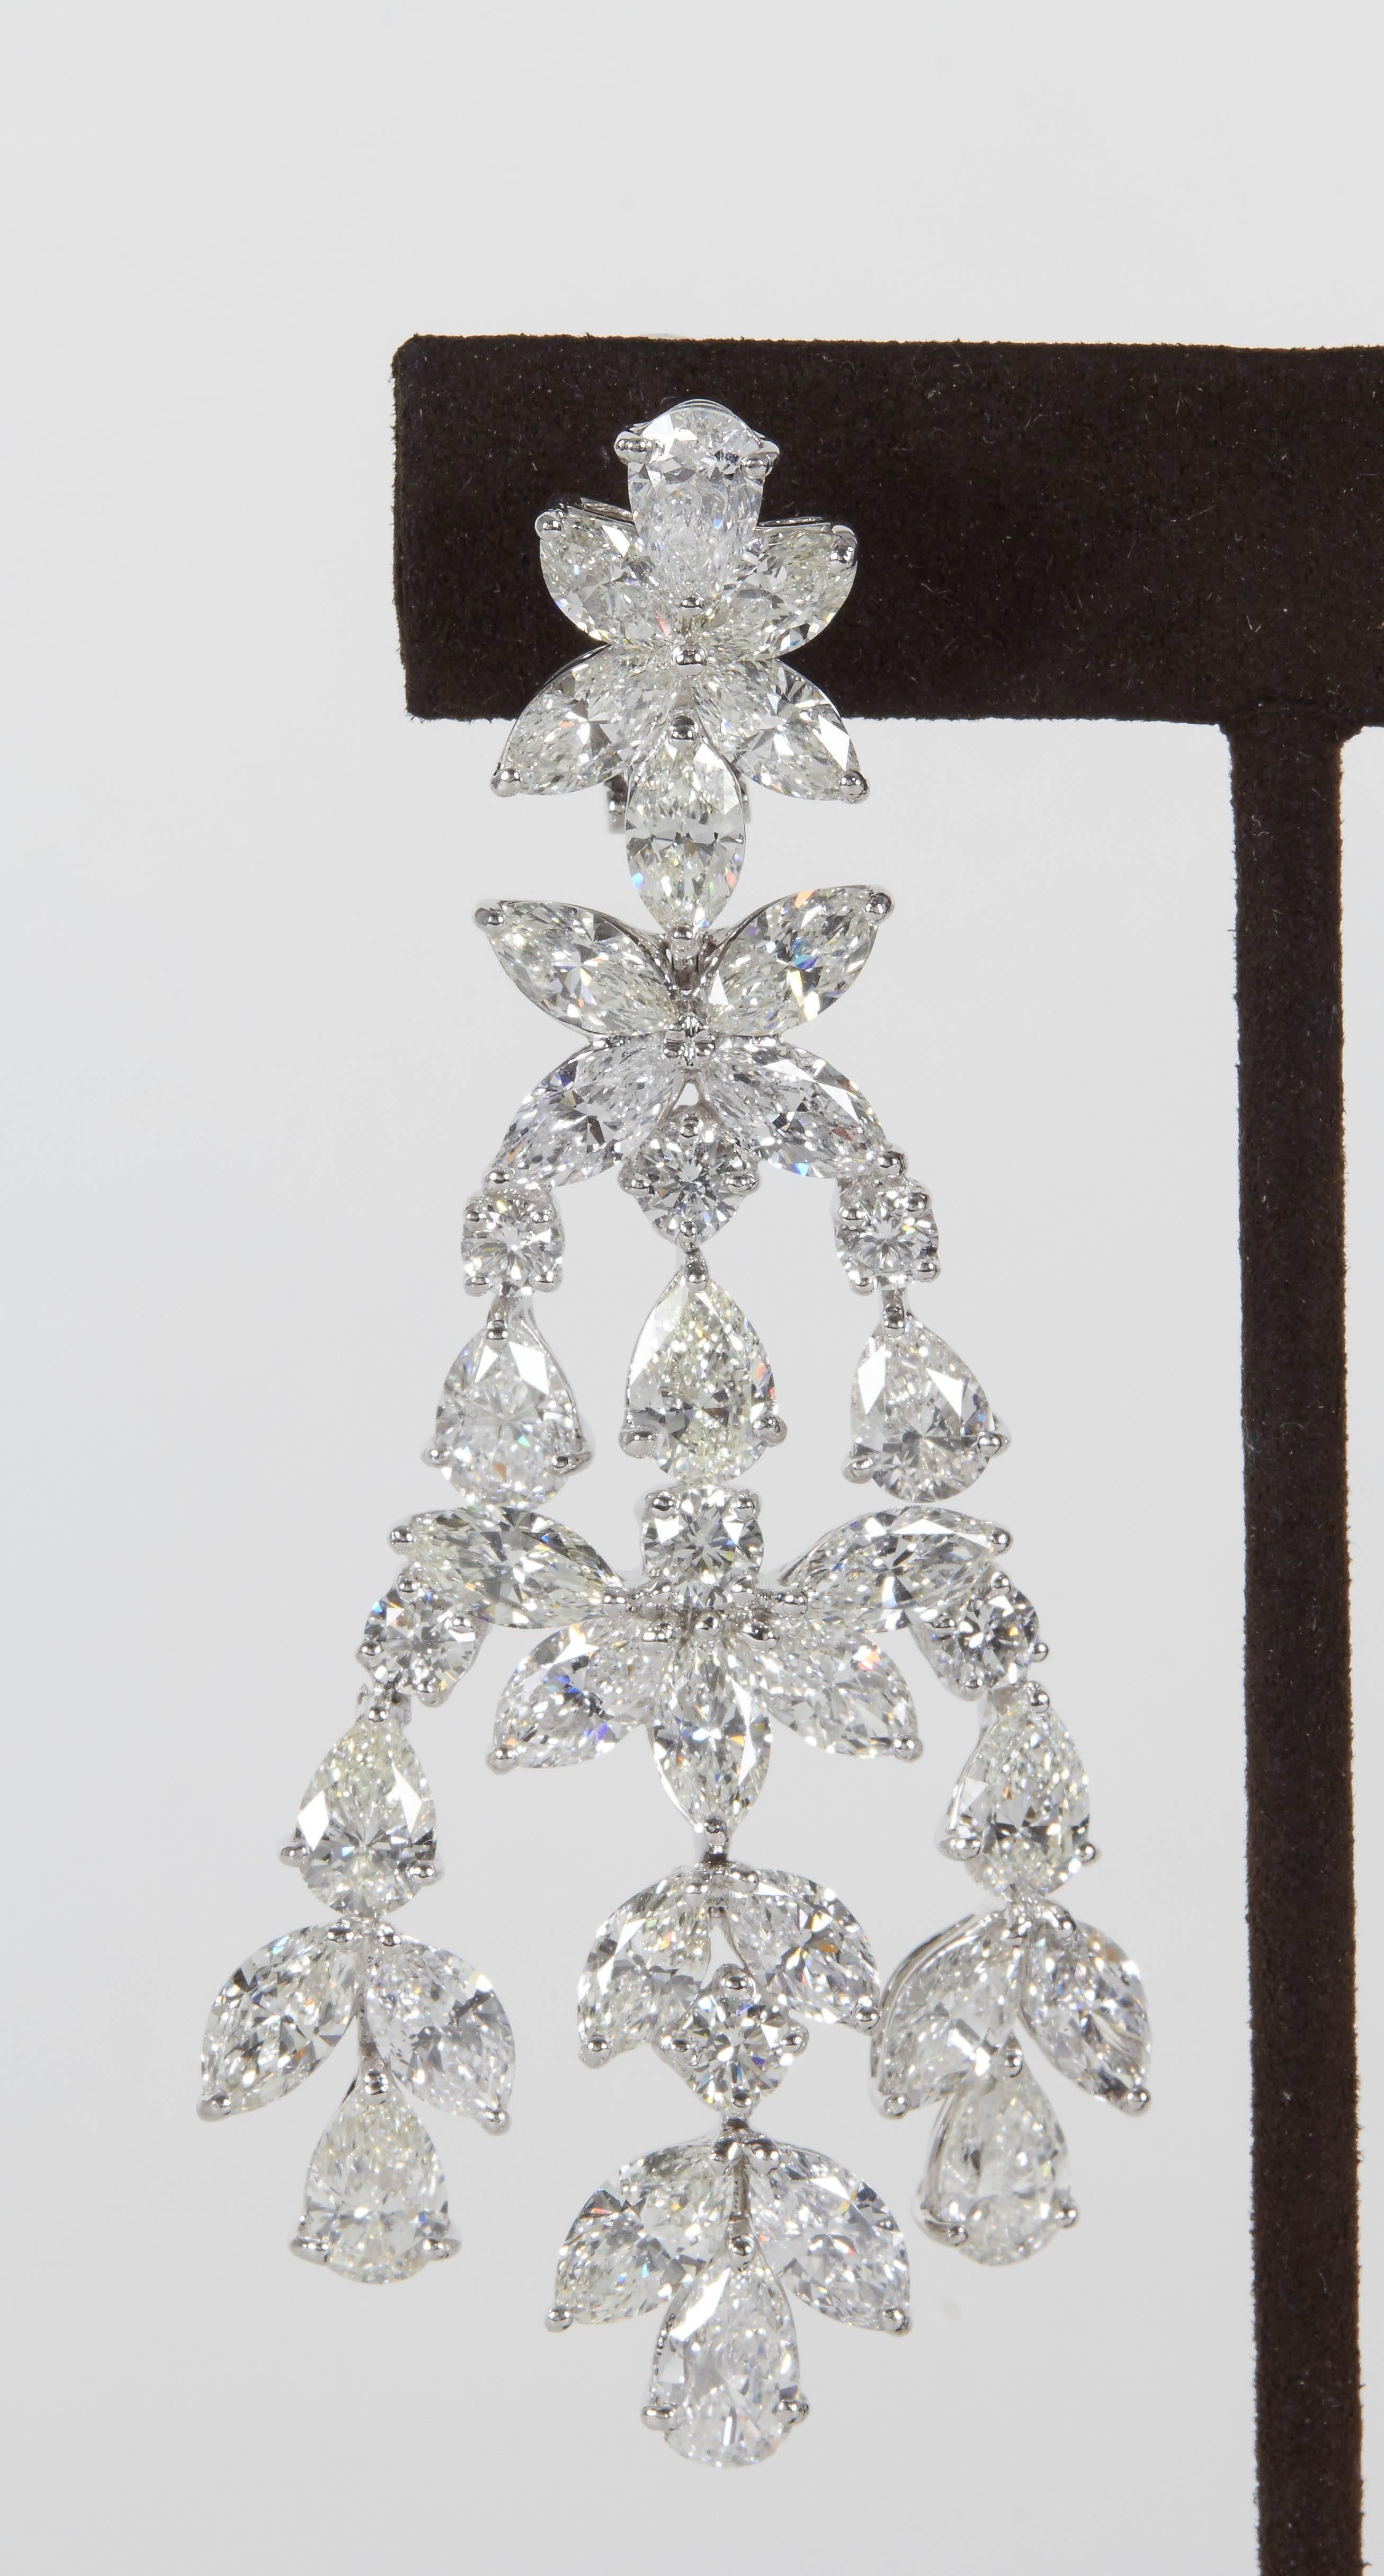 A fabulous statement earring featuring large sized brilliant diamonds. 

46.01 carats of pear, marquise and round brilliant cut diamonds F-G in color VS clarity set in platinum.

A unique and grand design!

Approximately 3 inches in length and